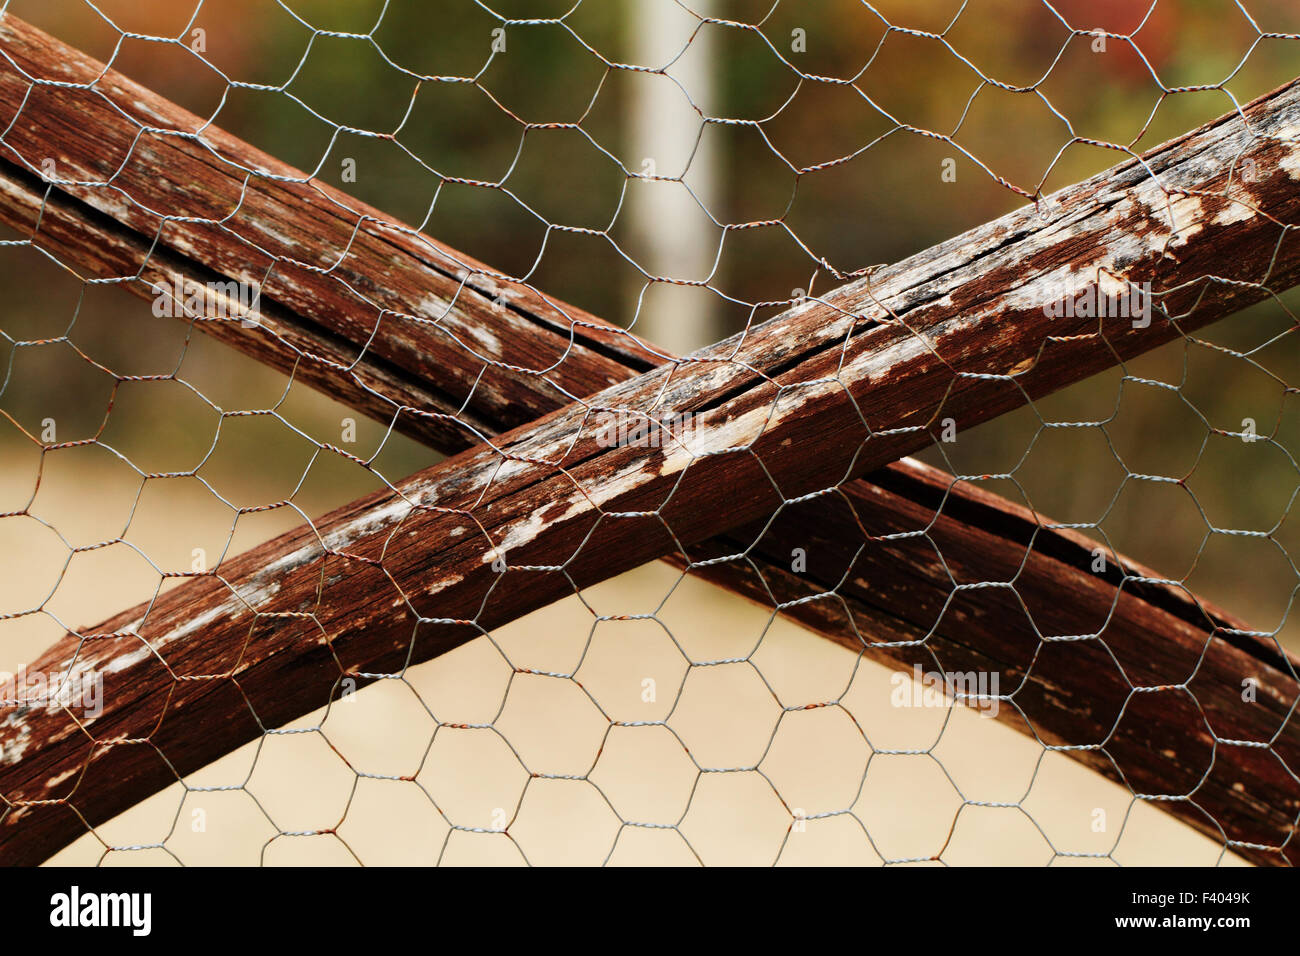 Brown painted wood and thin wire fence Stock Photo